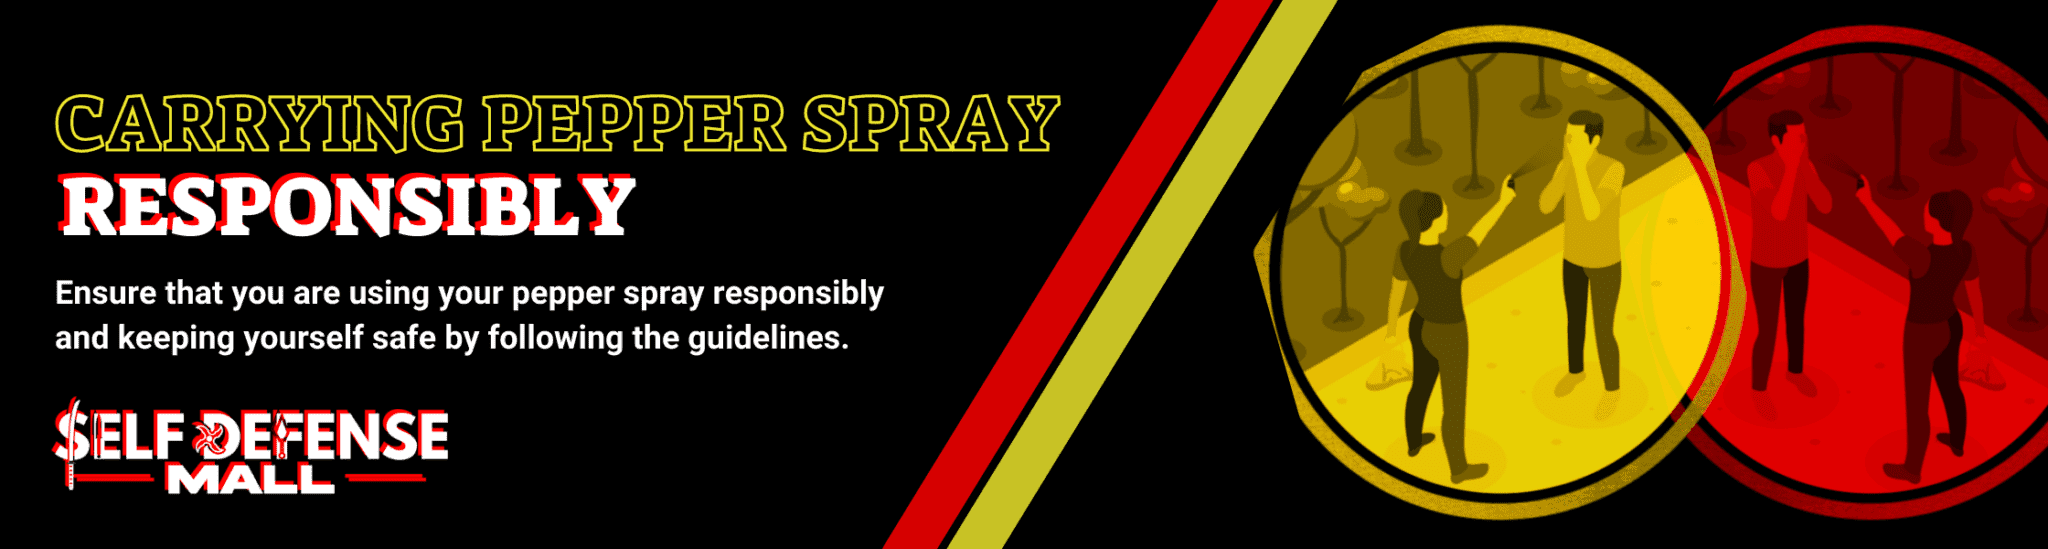 Carrying-pepper-spray-responsibly.-2048x549